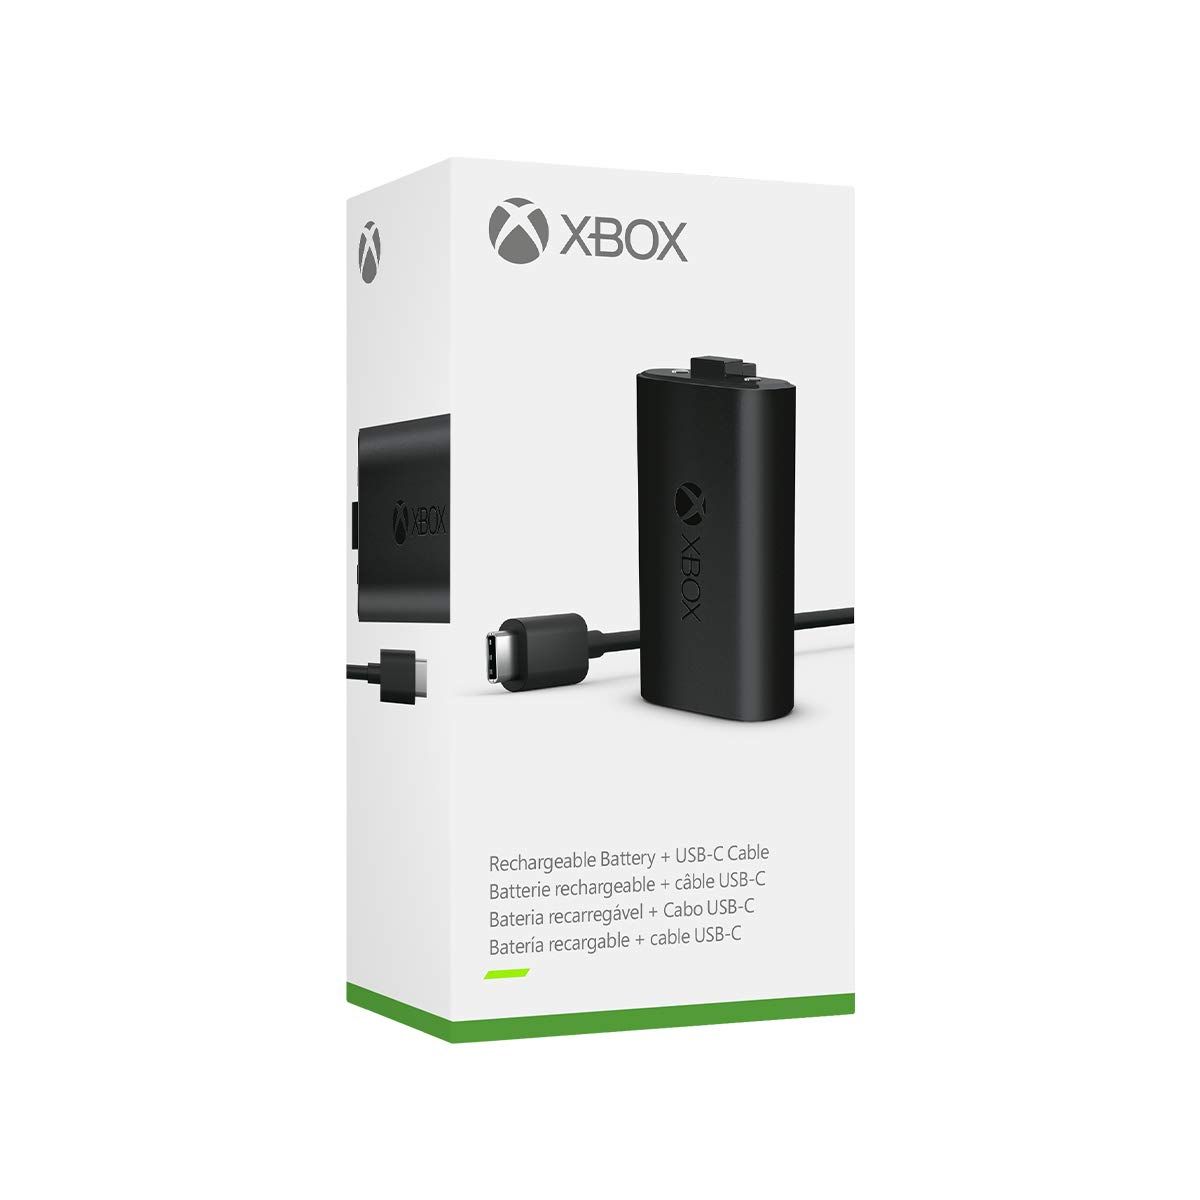 Xbox Rechargeable Battery and USB-C Cable shipping box